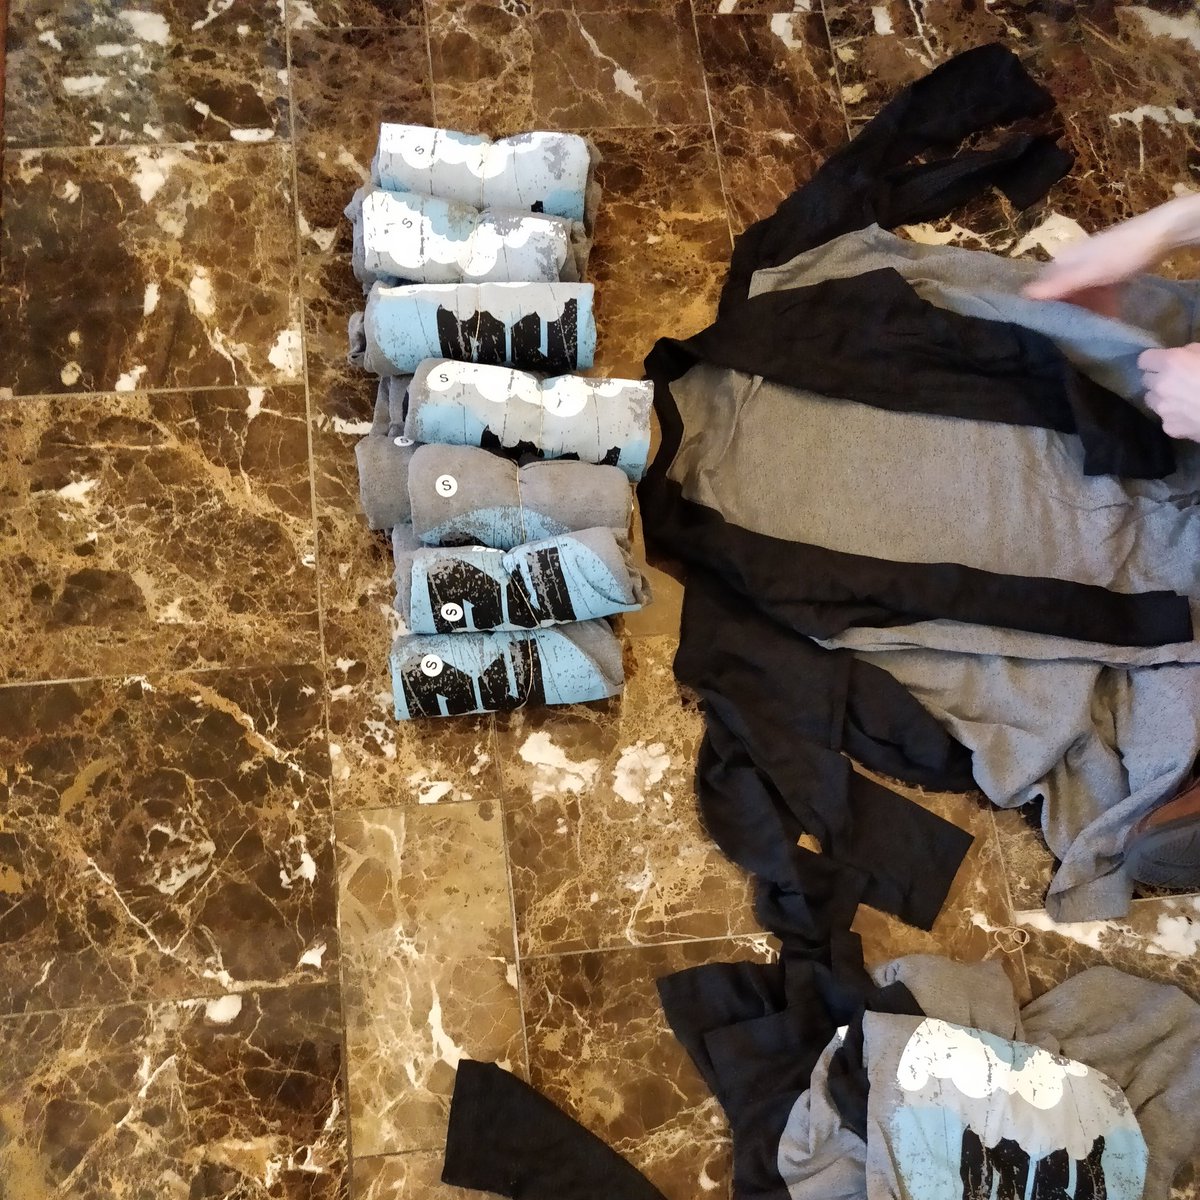 nexcess: Making sure our #swag is ready for everyone to pick up today. Make sure you visit booth #122 at #MagentoImagine. https://t.co/ZGdX0pvIUR